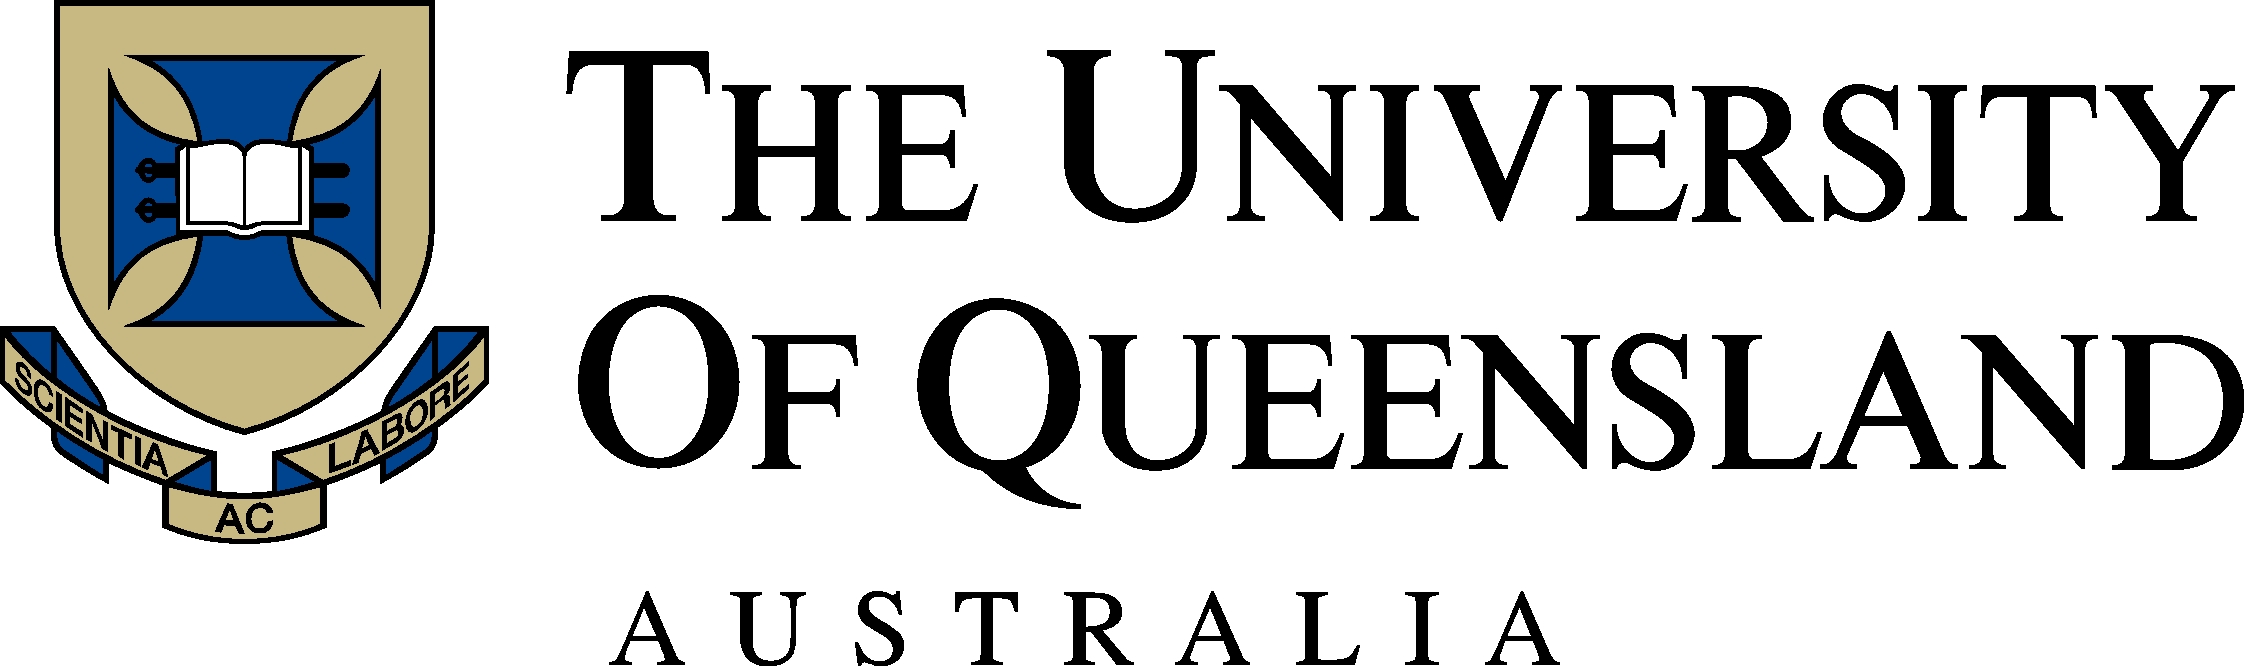 University of Queensland - Research Computing Centre